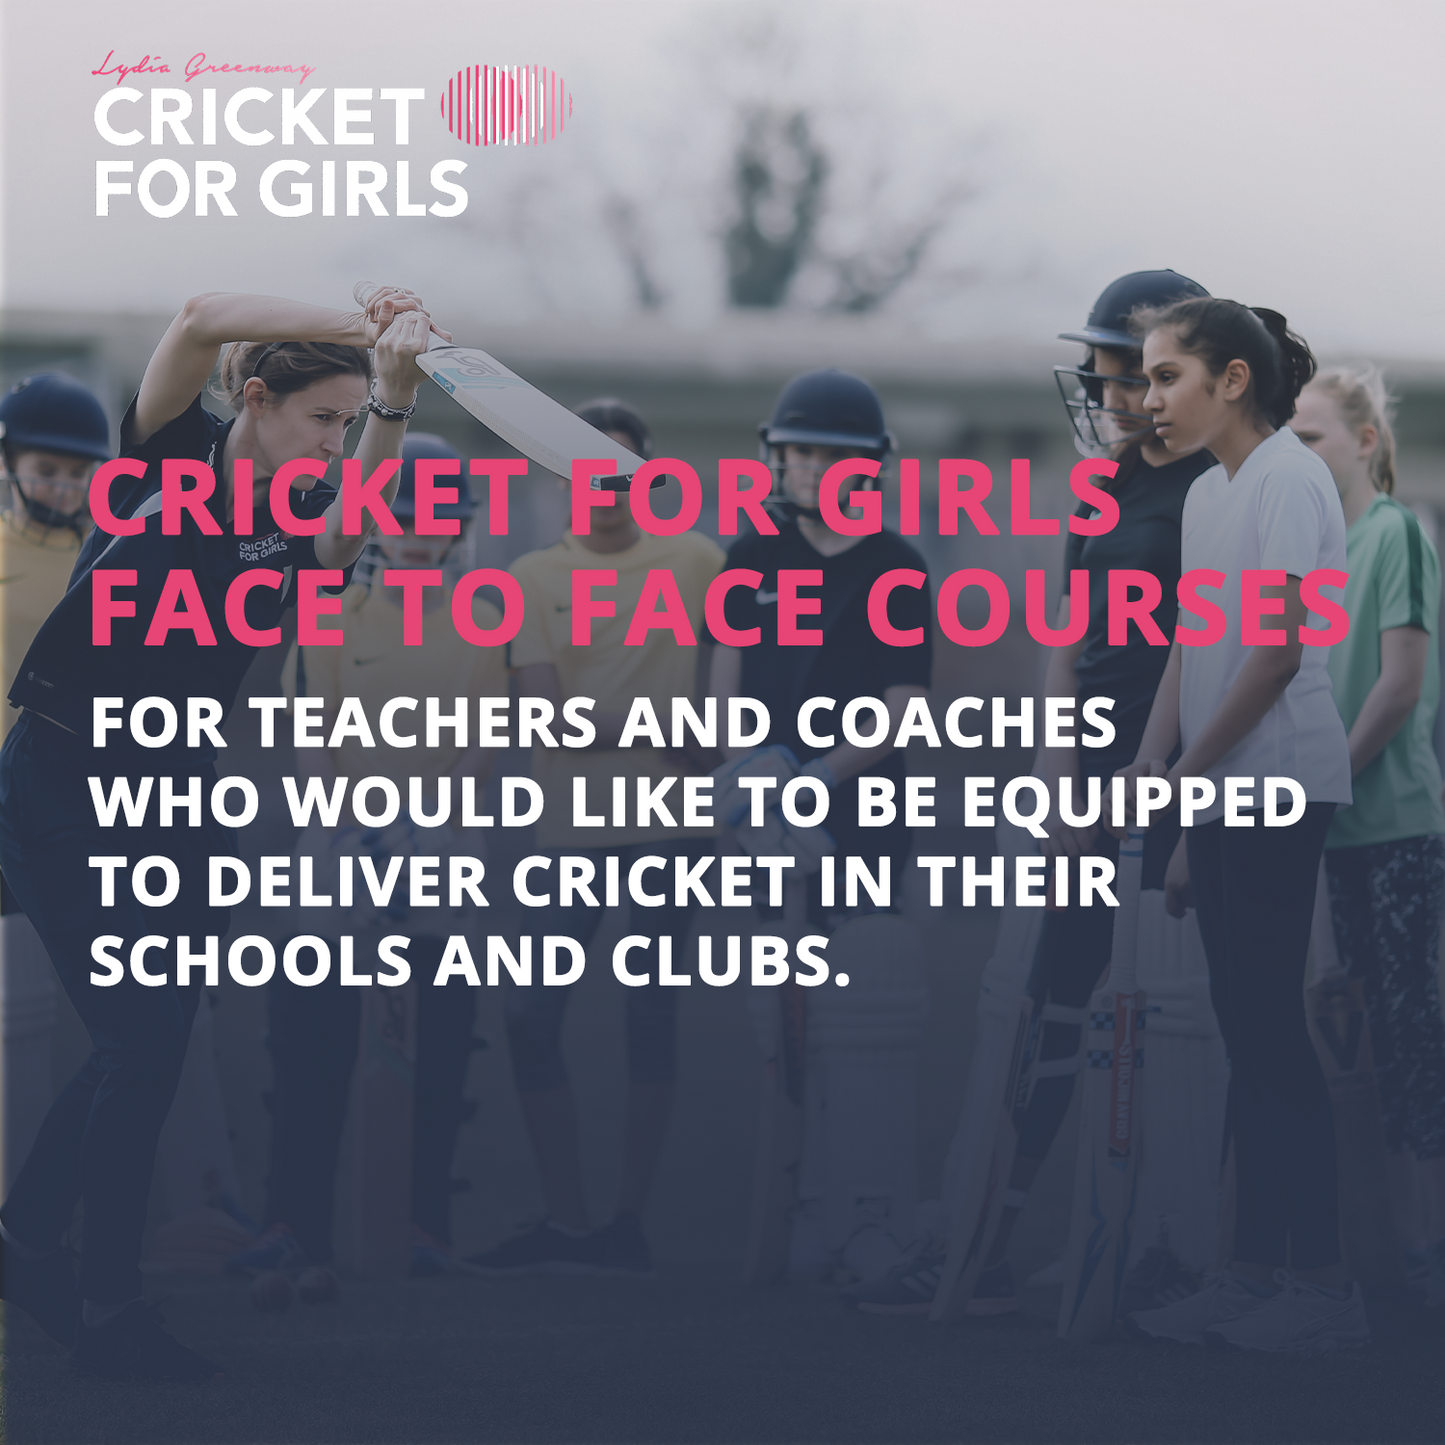 Cricket for Girls Conference 2024 - Friday 15th March 2024 - Venue TBC (London area)